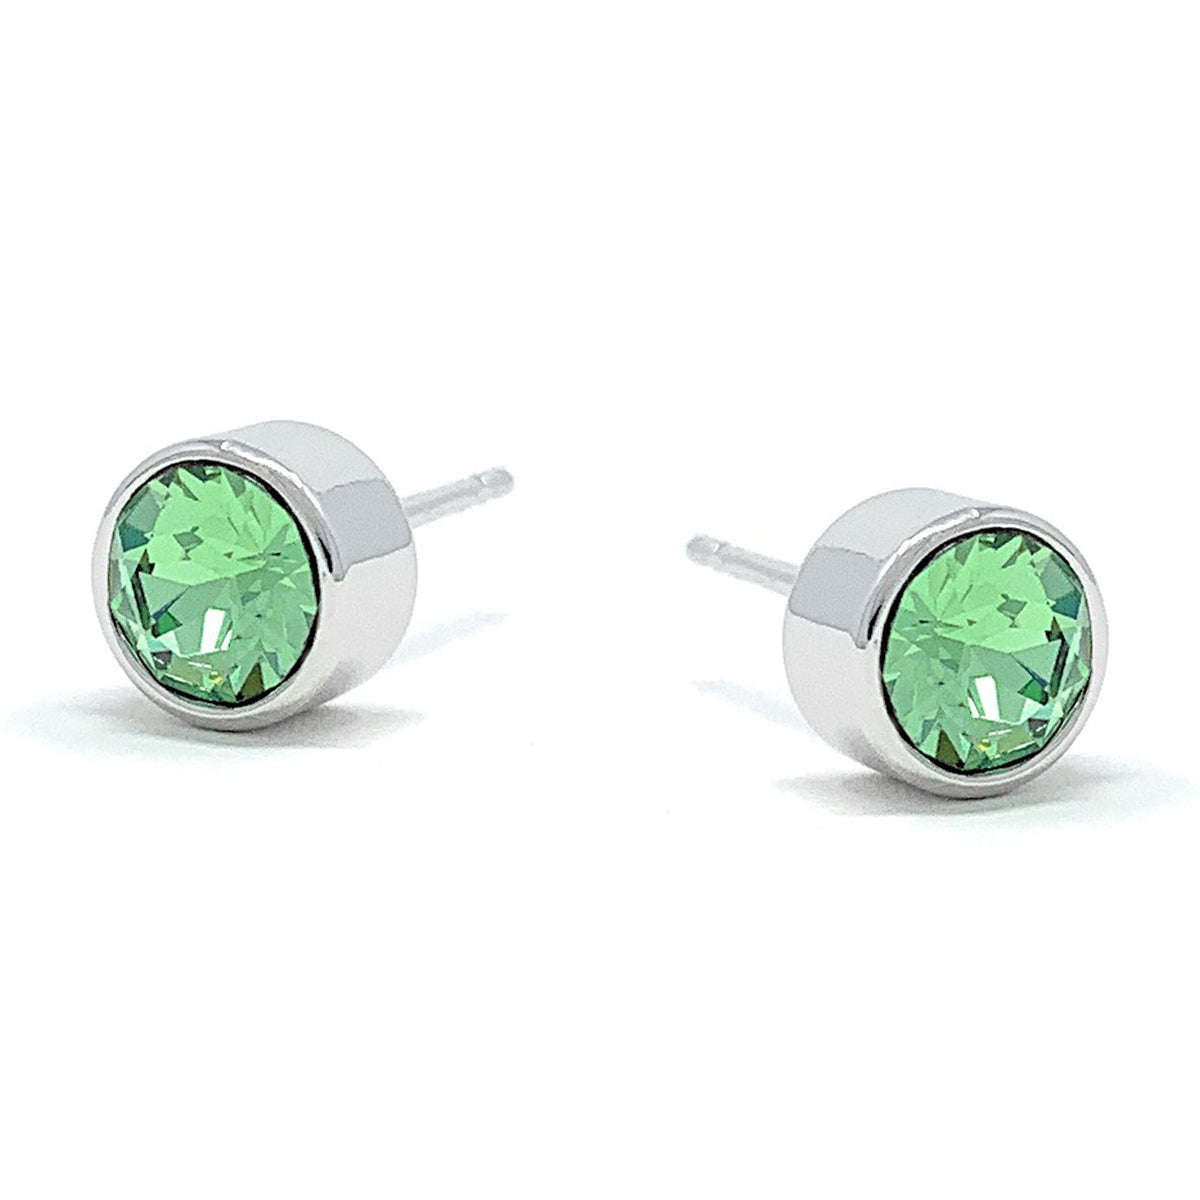 Harley Small Stud Earrings with Green Peridot Round Crystals from Swarovski Silver Toned Rhodium Plated - Ed Heart